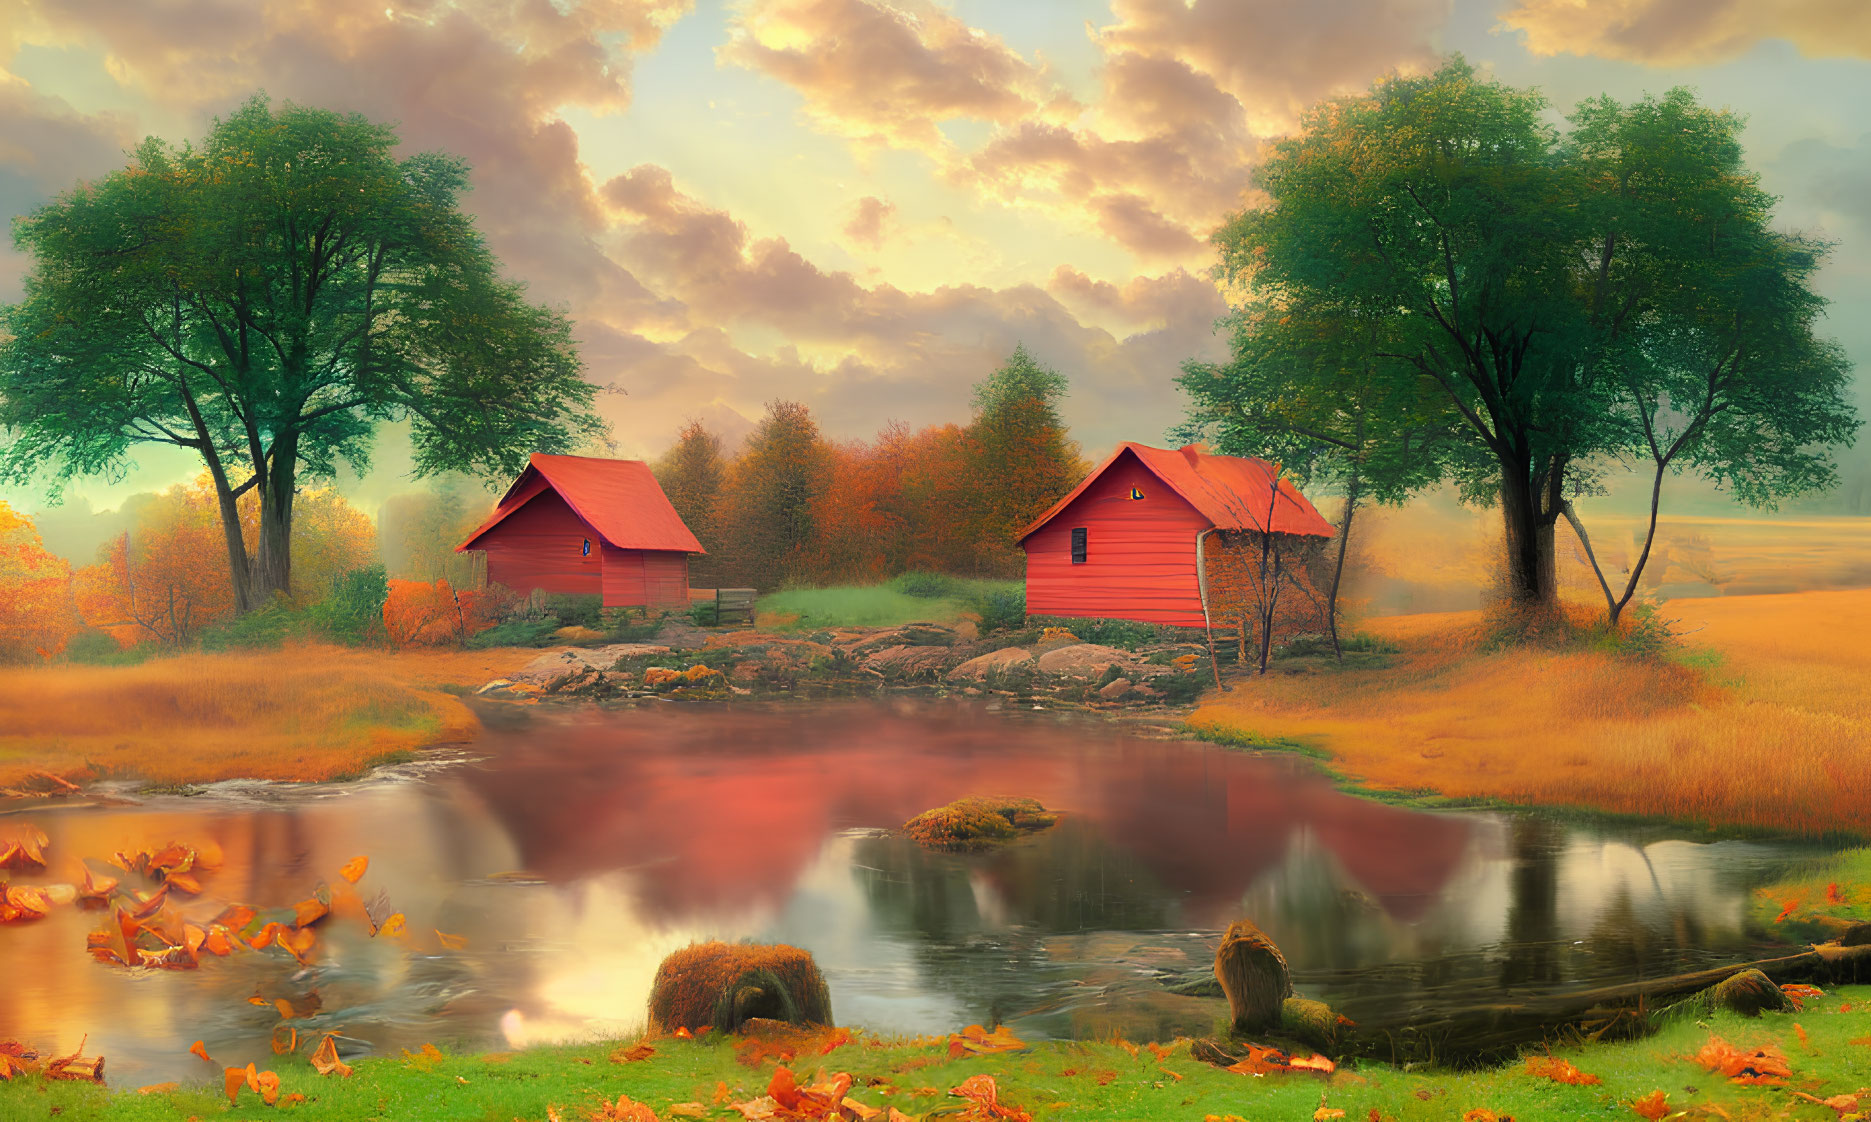 Serene autumn landscape with red cabins, pond, fall foliage, and cloudy sky